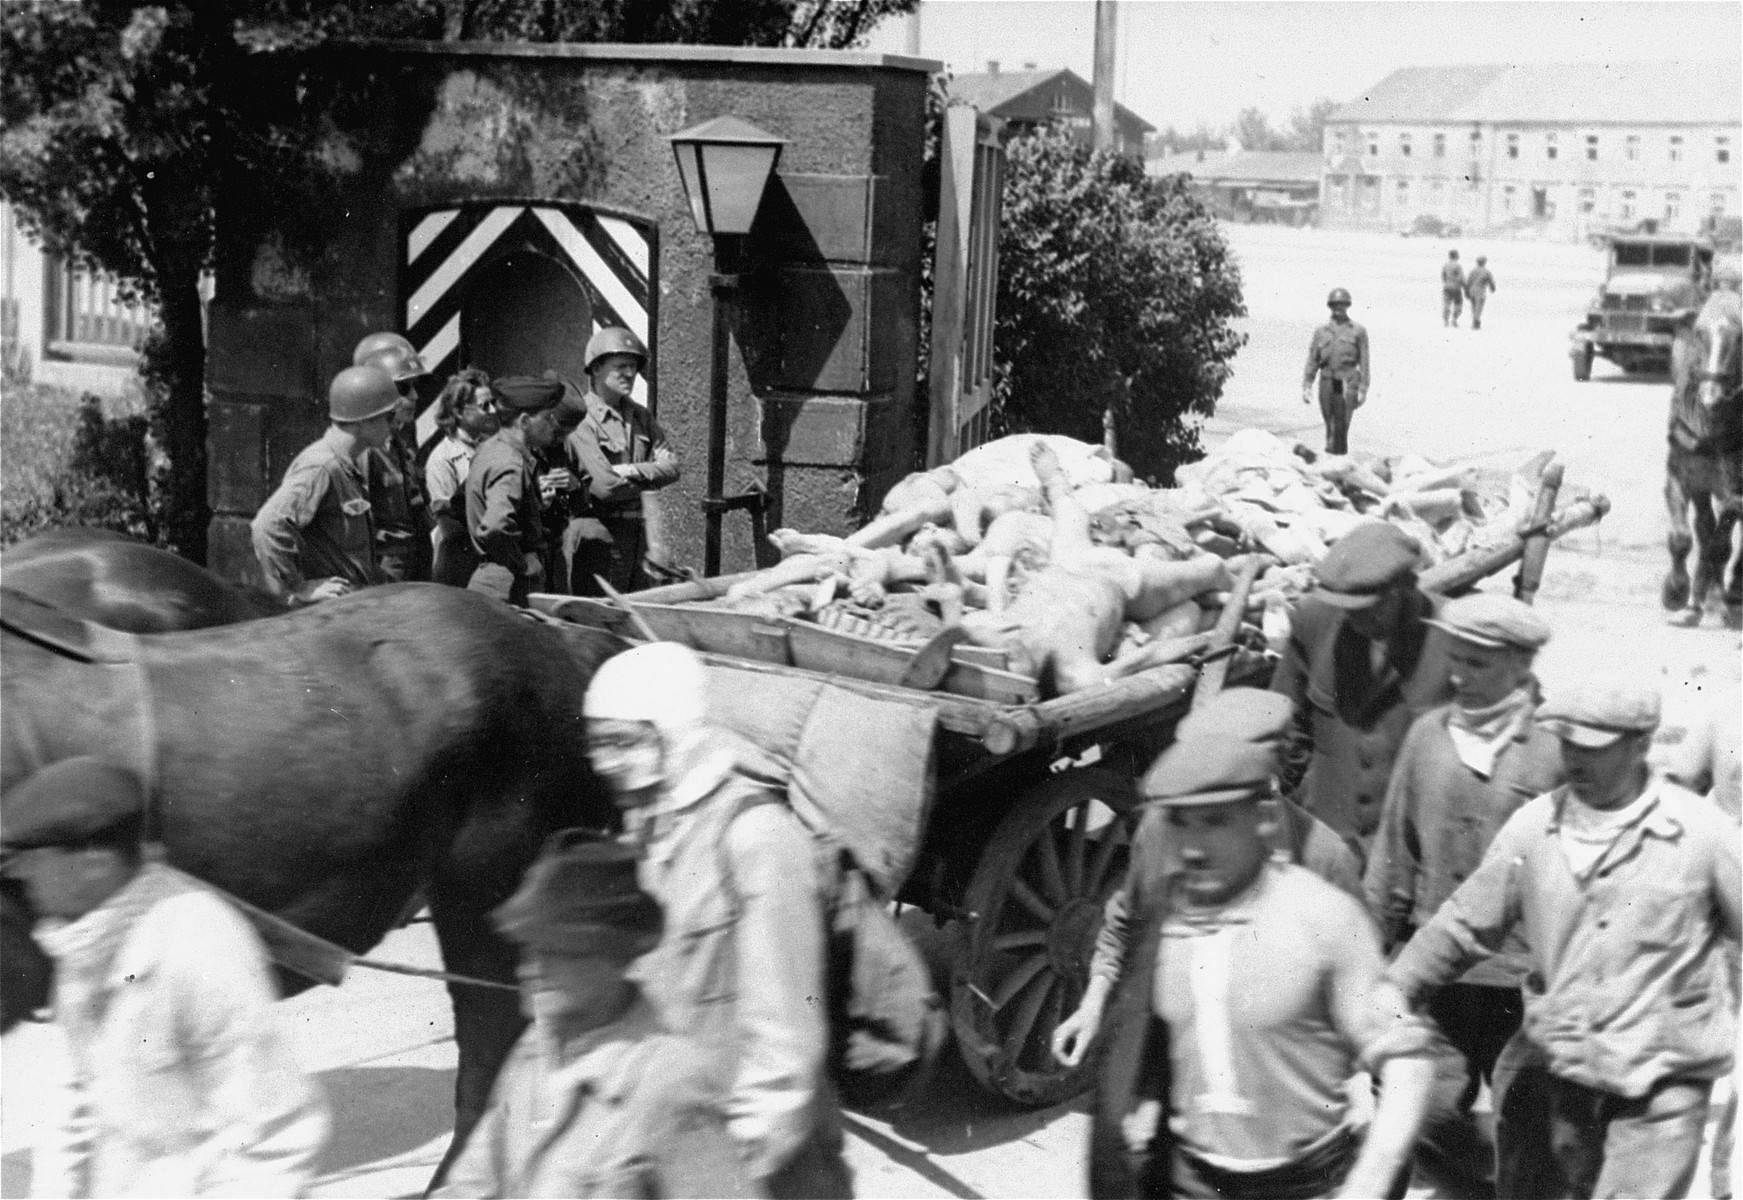 American soldiers watch carts laden with corpses pass out of the Dachau concentration camp.  Allied authorities required local farmers to drive their loaded carts through the town of Dachau as an education for the inhabitants.